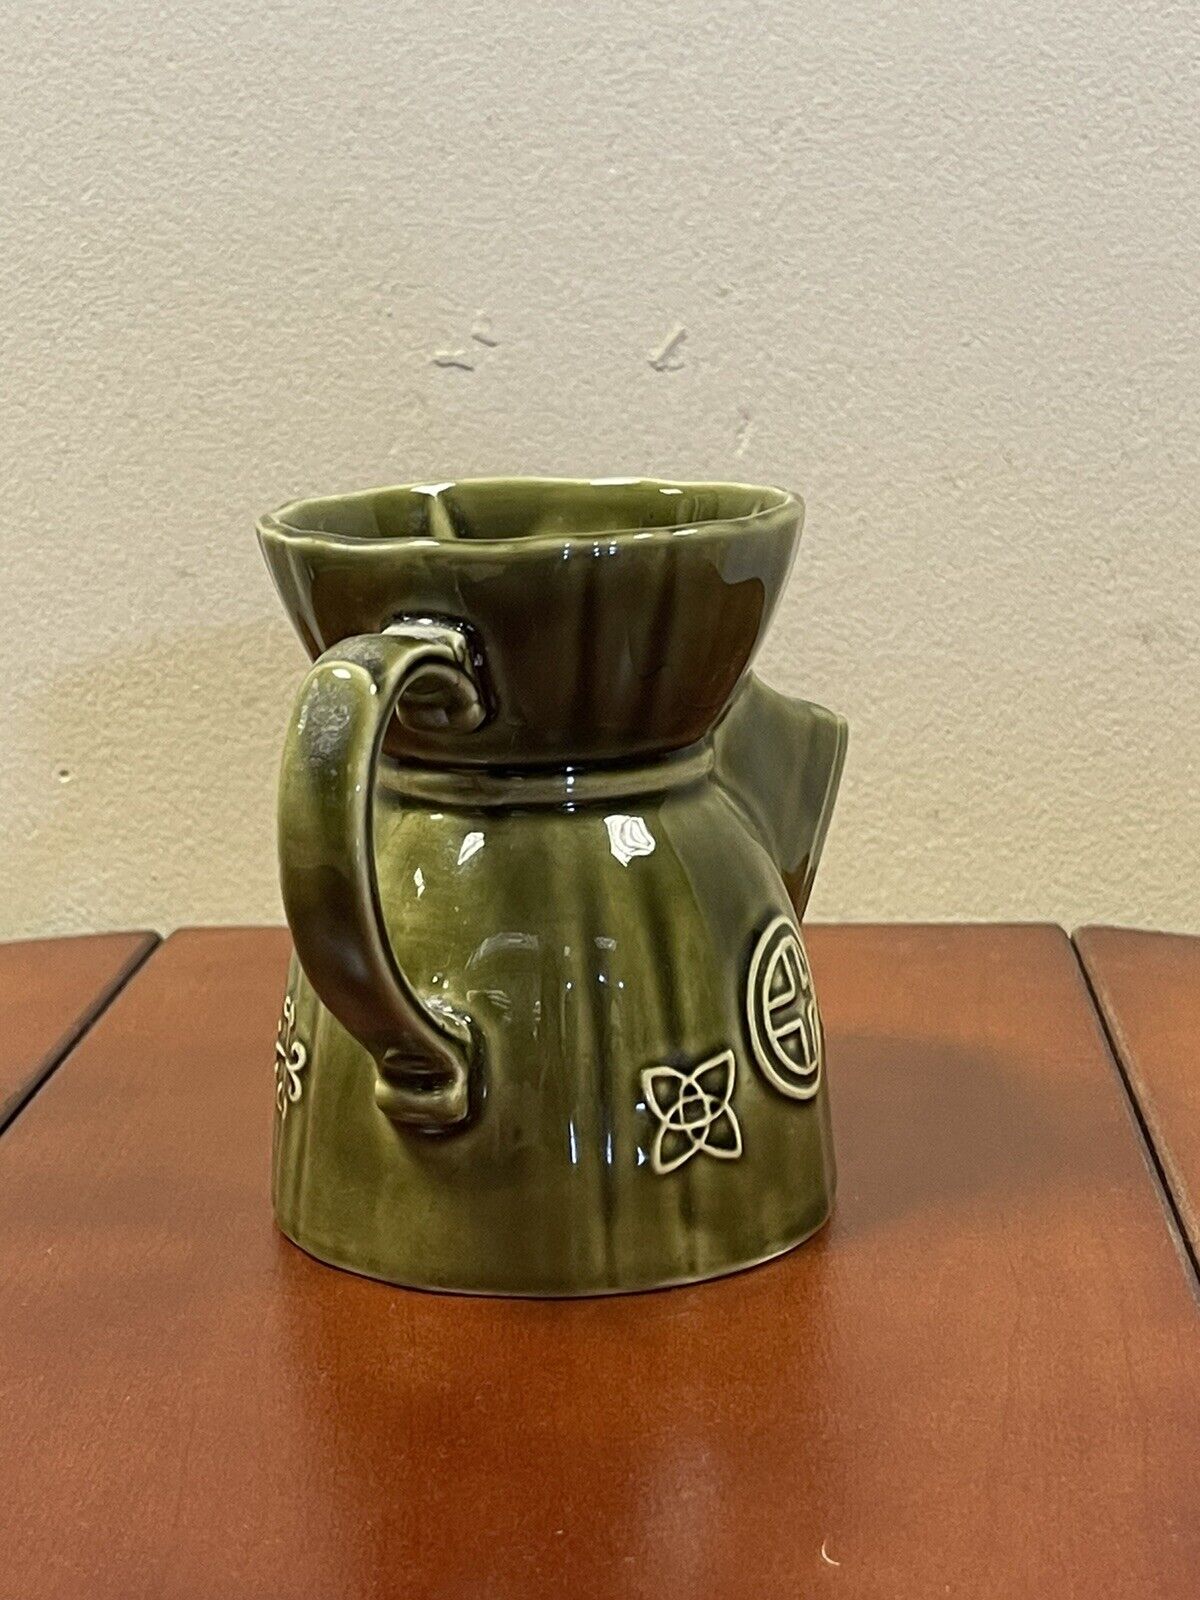 VINTAGE LORD NELSON OLIVE GREEN POTTERY SHAVING SCUTTLE JUG